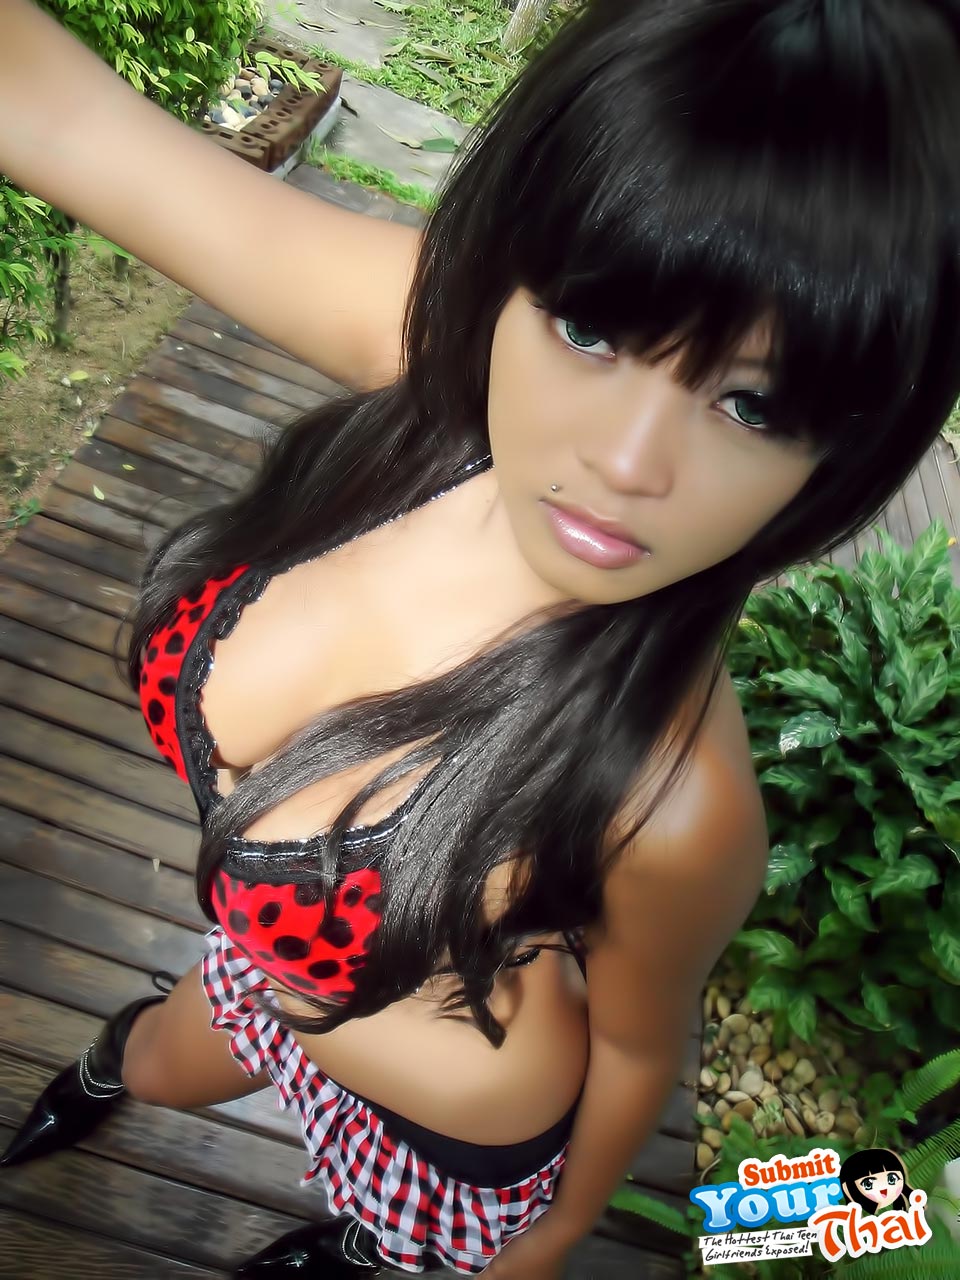 Big tit Thai girlfriend stripping and posing outdoors